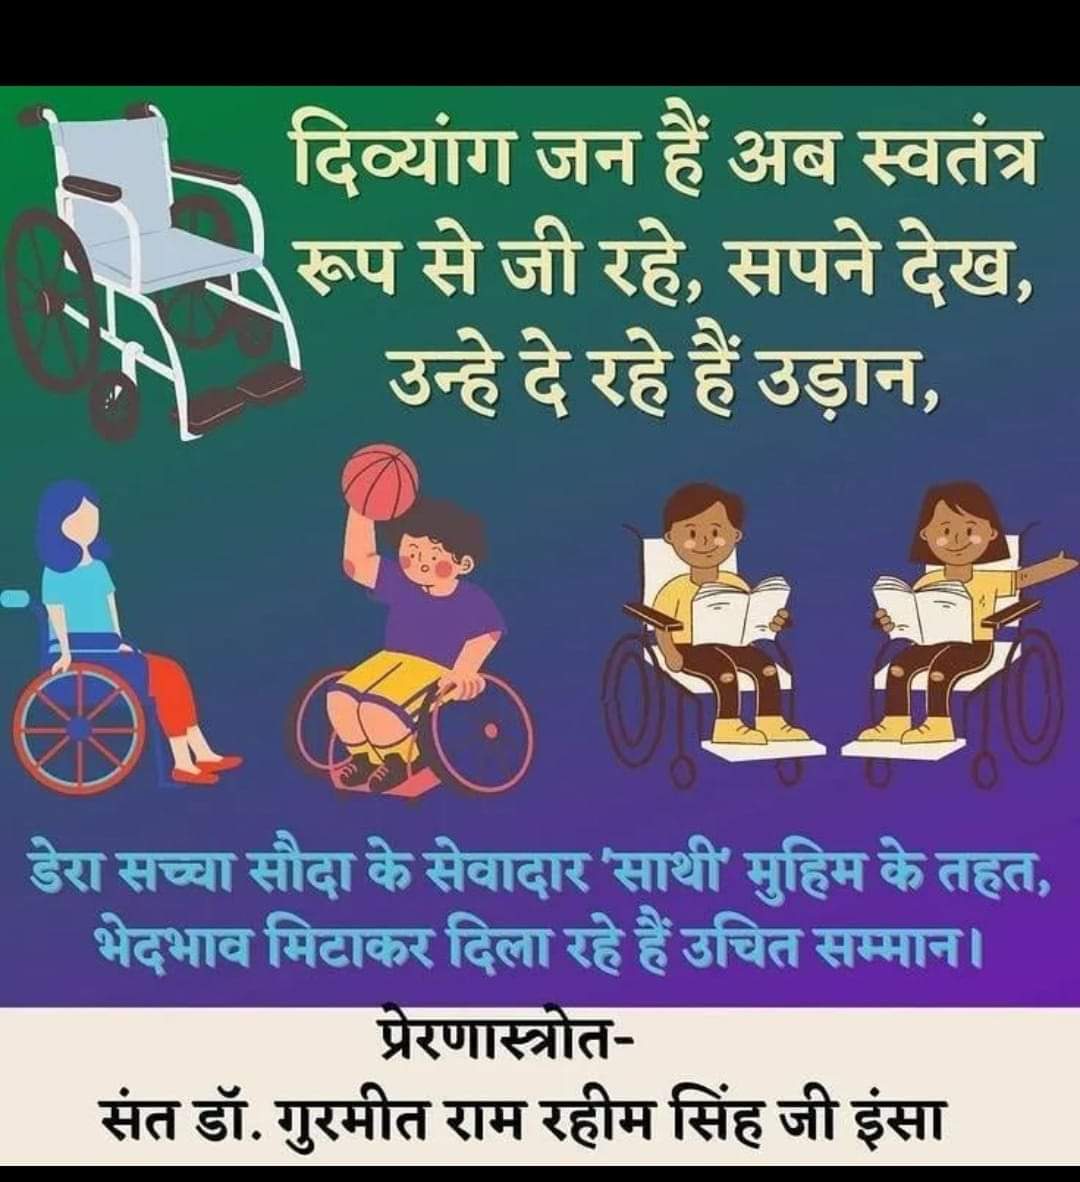 Seeing the plight of physically challenged people struggle with discrimination and dependence on others. With the inspiration of SaintDrMSG free wheelchairs are provided by Dera Sacha Sauda volunteers supporting them to live an independent life #साथी_मुहिम
#RamRahim